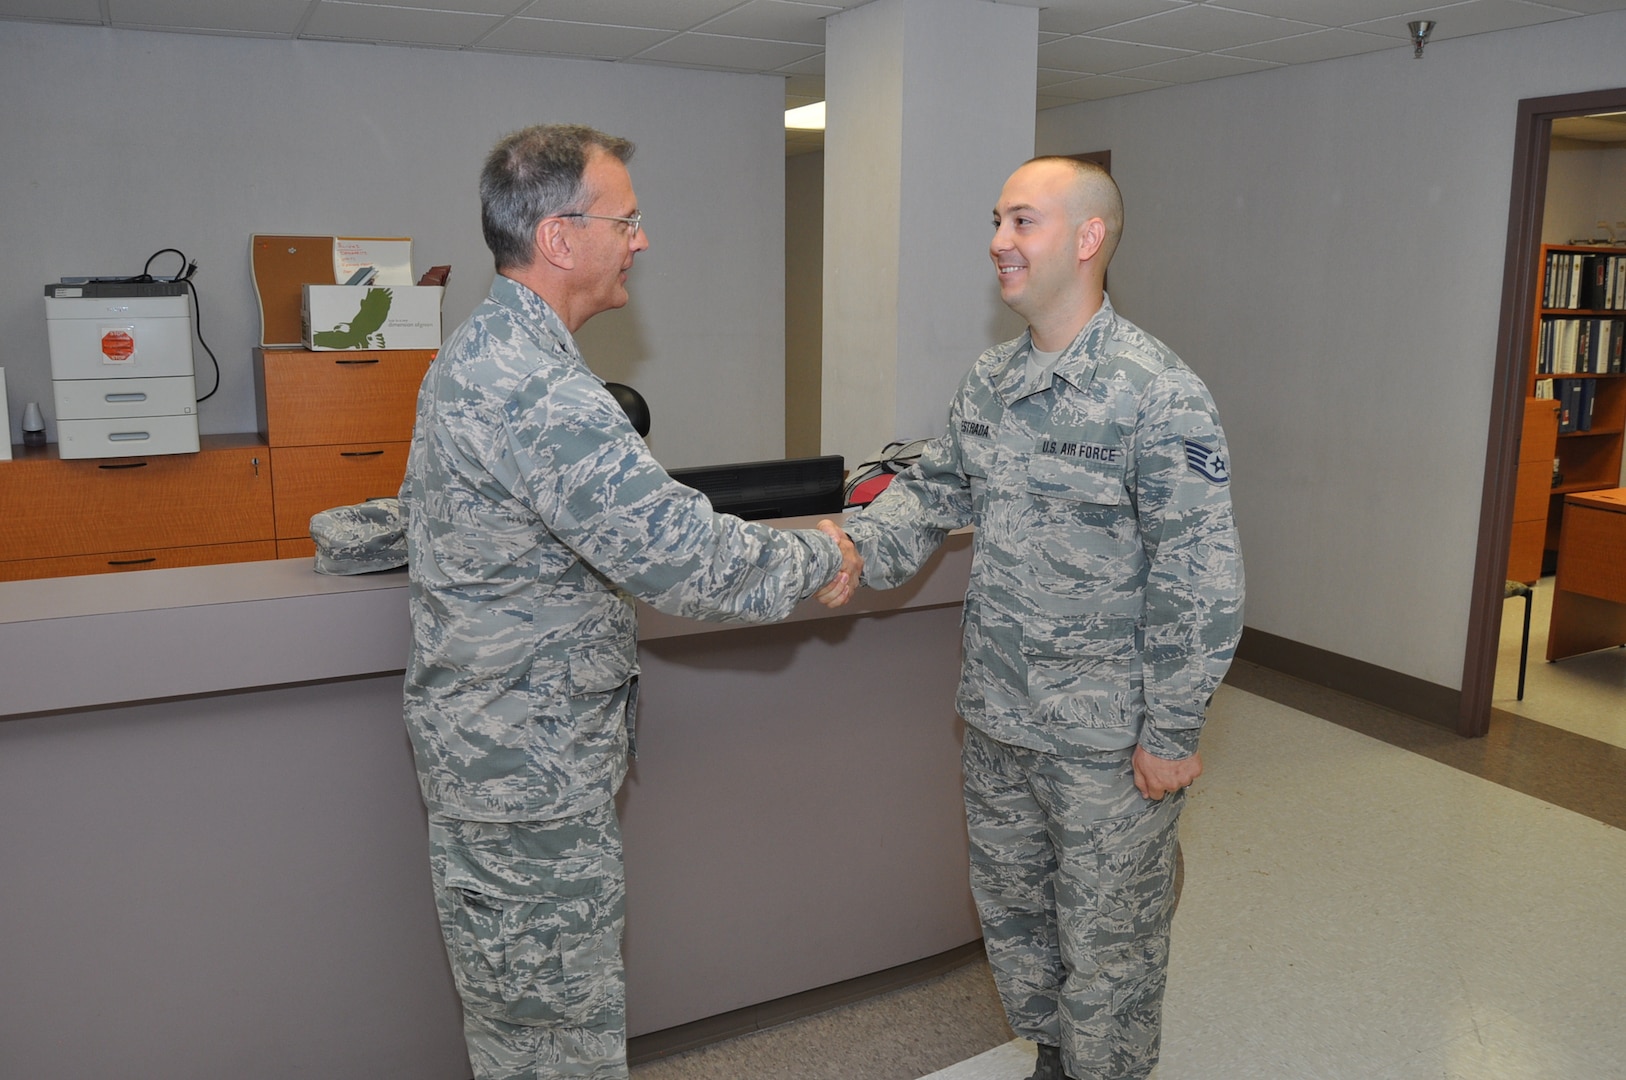 Maj. Gen. Randall Ogden, 4th Air Force commander, presents a commander's coin to Staff Sgt. Isaiah Estrada, 433rd Civil Engineer Squadron contractor, Oct. 15, 2017 for his accomplishments and achievements within the squadron. Both Gen. Ogden and Chief Master Sgt. Timothy White, Jr., 4th AF command chief, presented approximately 14 commanders coins to outstanding Reserve Citizen Airmen during their four-day visit to the 433rd Airlift Wing. (U.S. Air Force photo/Senior Airman Bryan Swink)